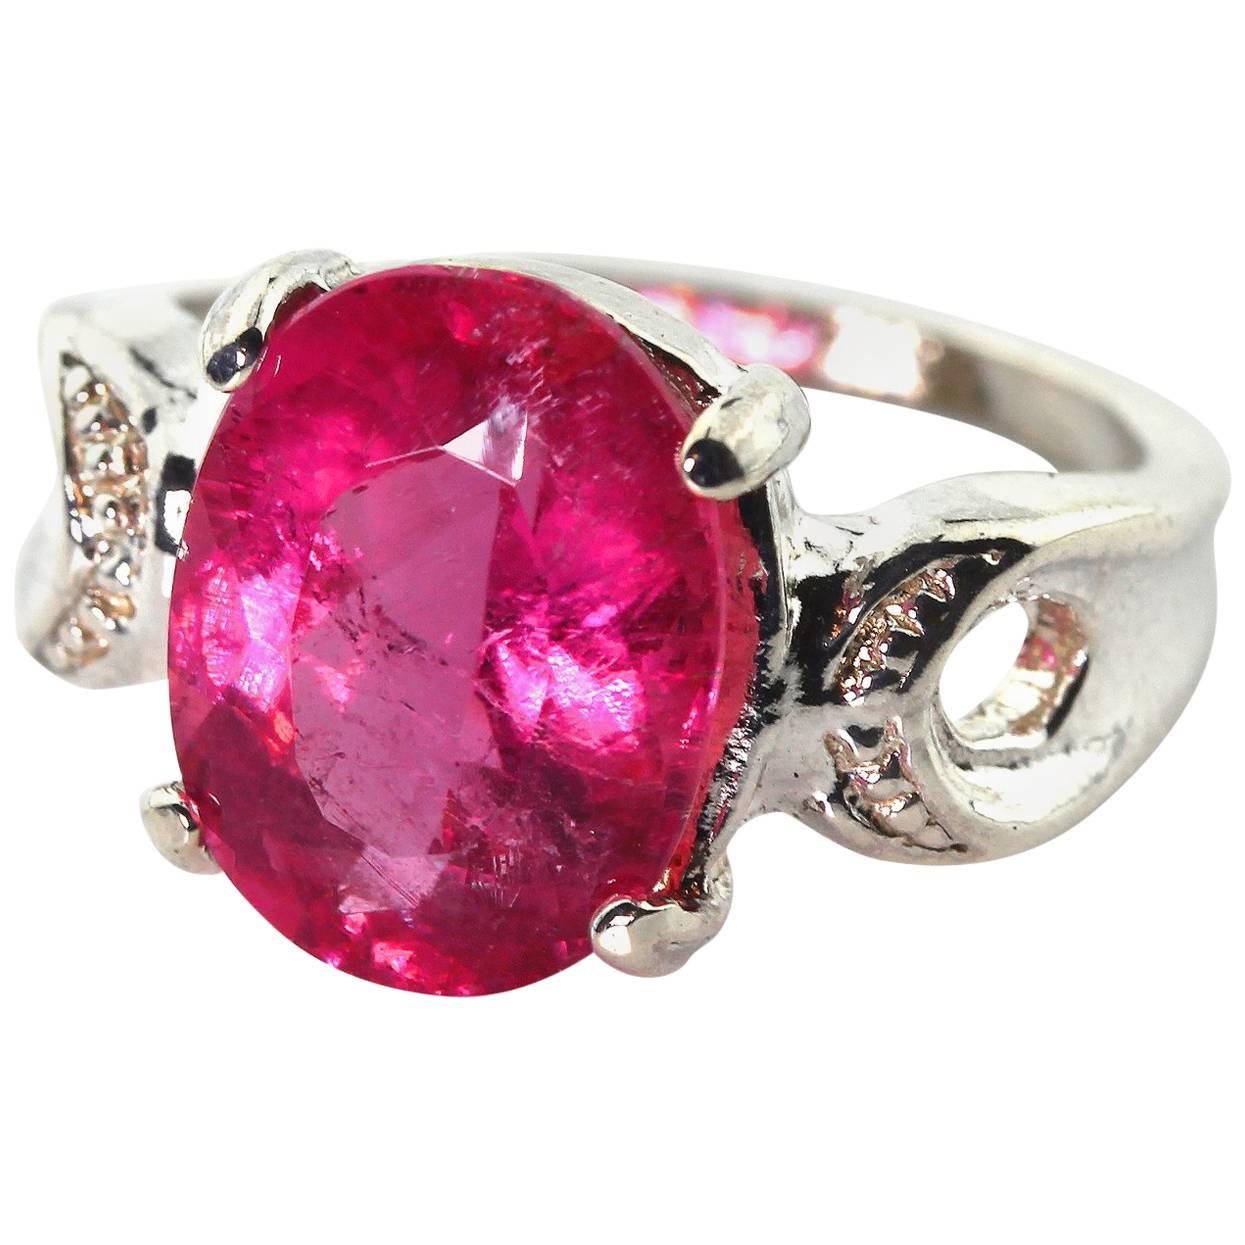 AJD Magnificent Oval 3.95 Ct Pink/Magenta Tourmaline Silver Cocktail Ring For Sale